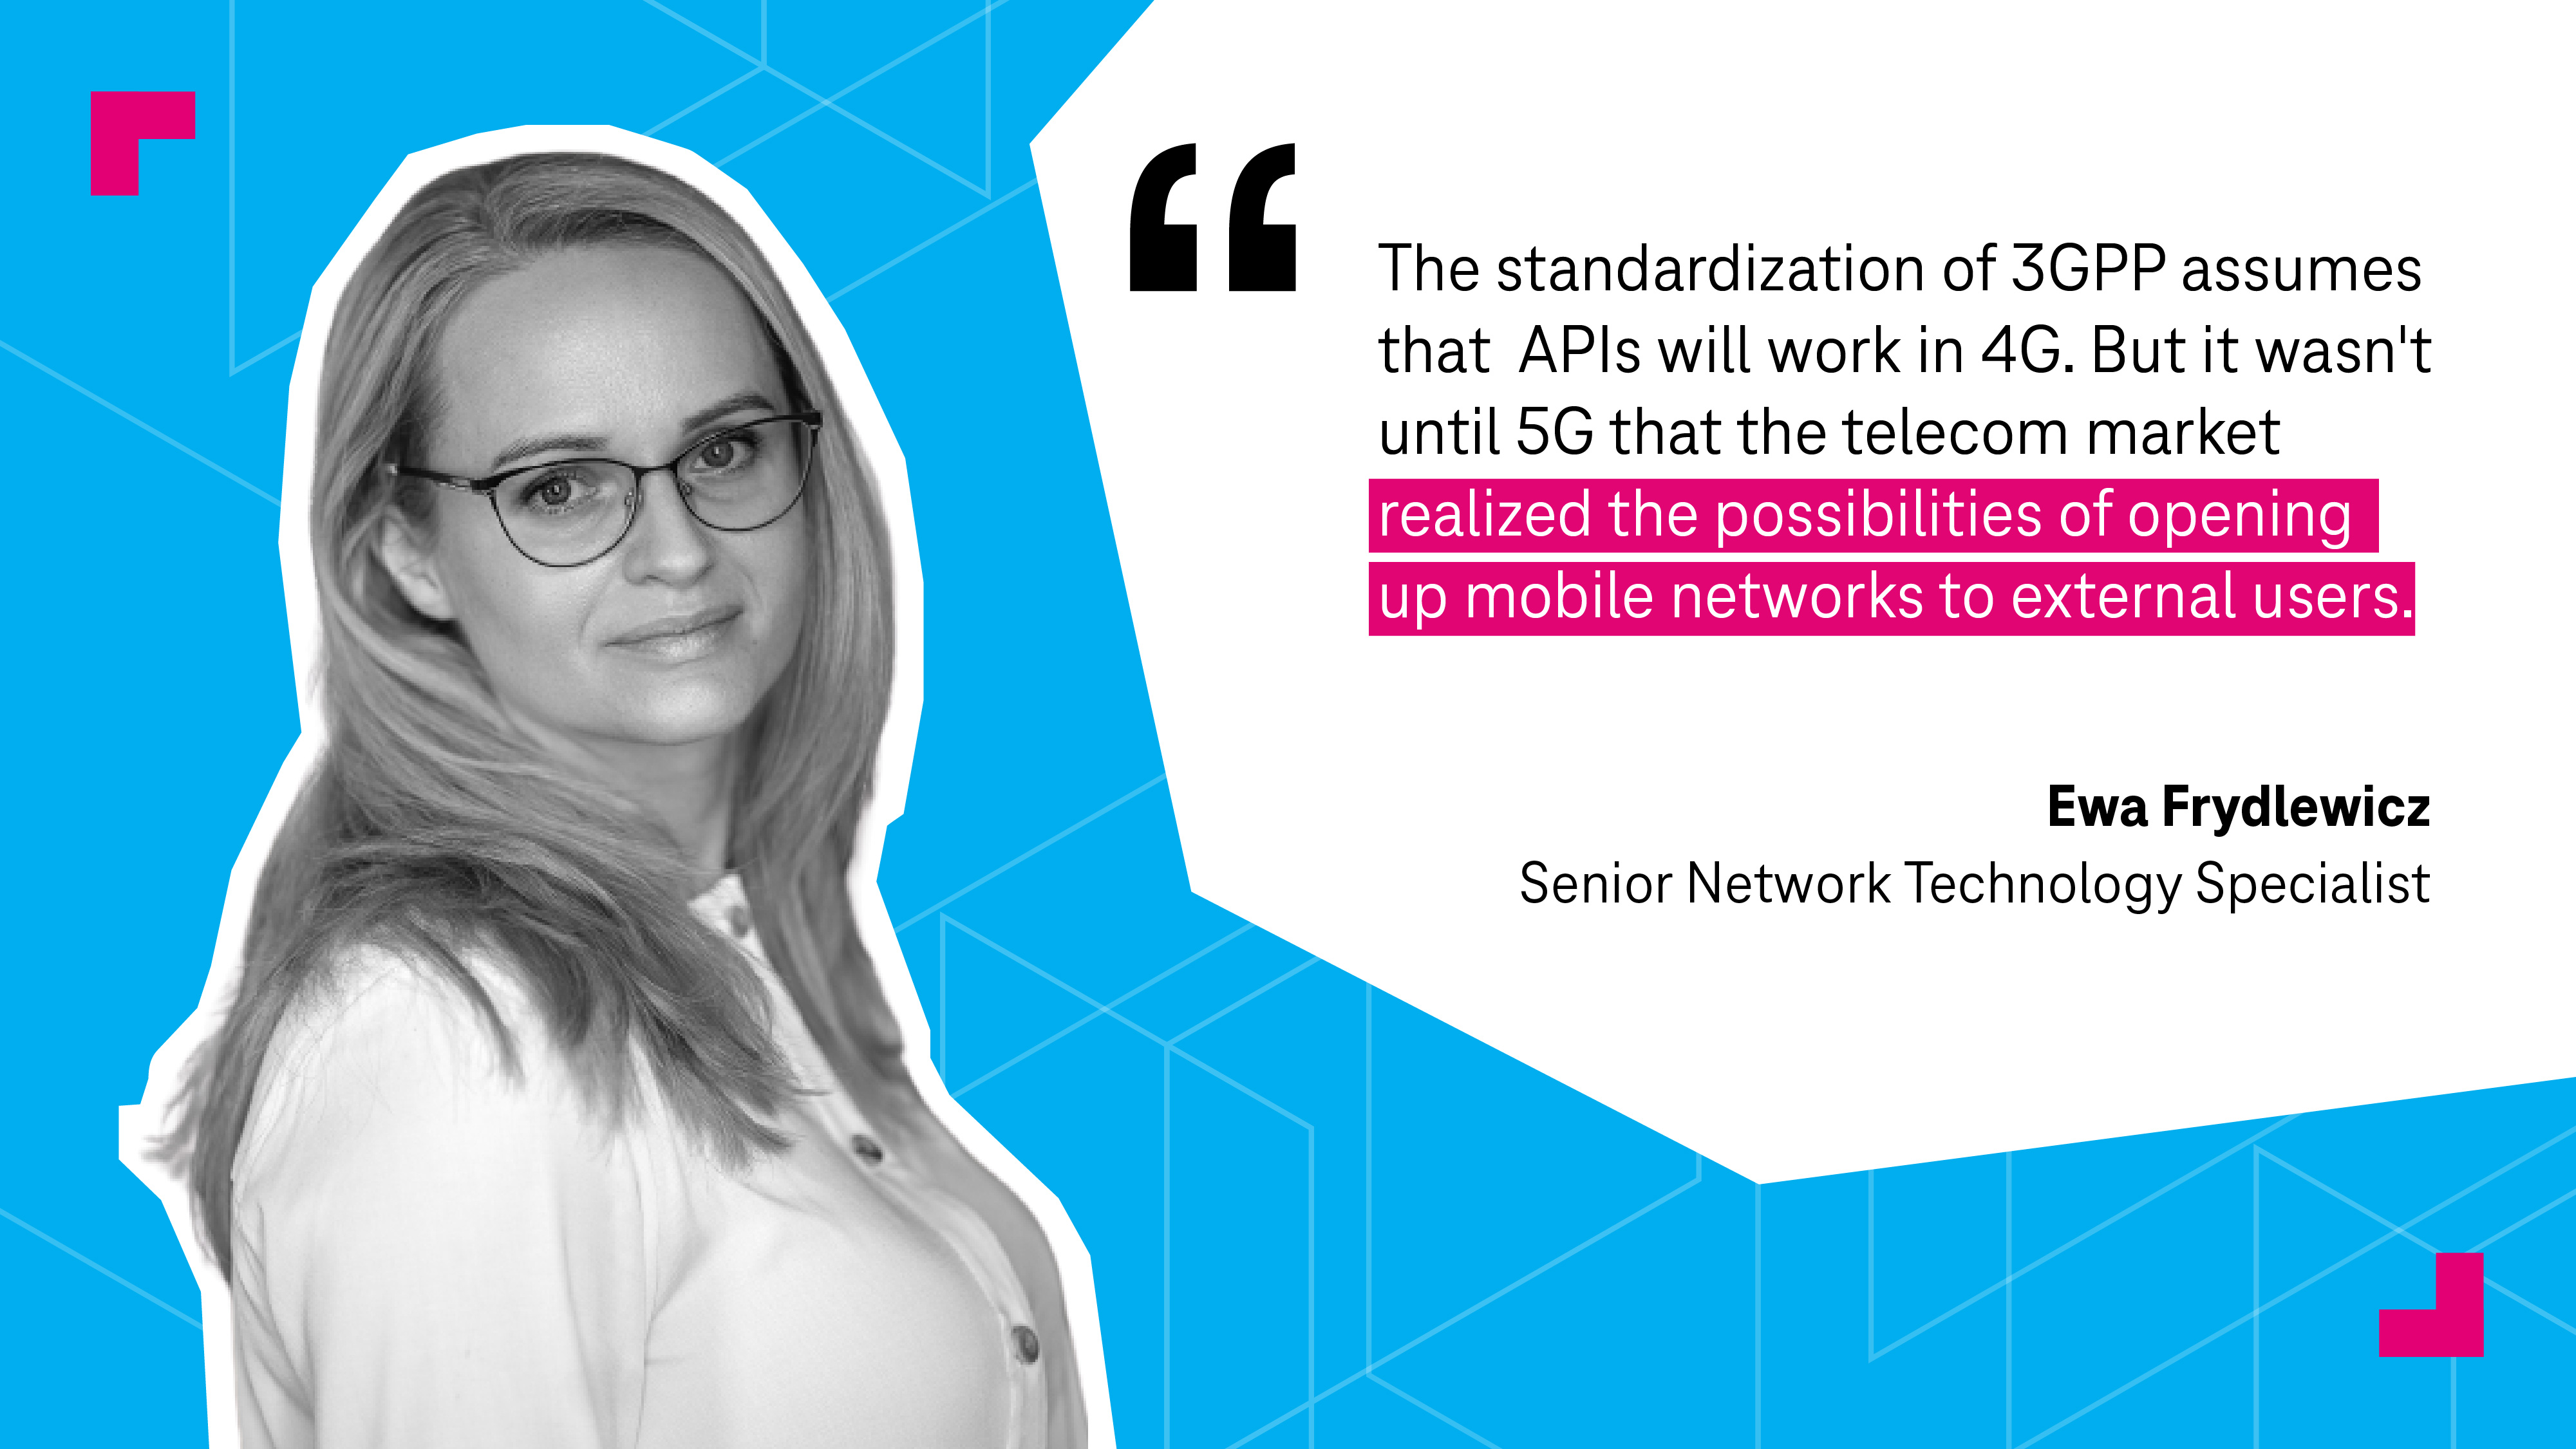 “The standardization of 3GPP assumes that APIs will work in 4G,” explains Ewa Frydlewicz Senior Network Technology Specialist. “But it wasn't until 5G that the telecom market realized the possibilities of opening up mobile networks to external users.“